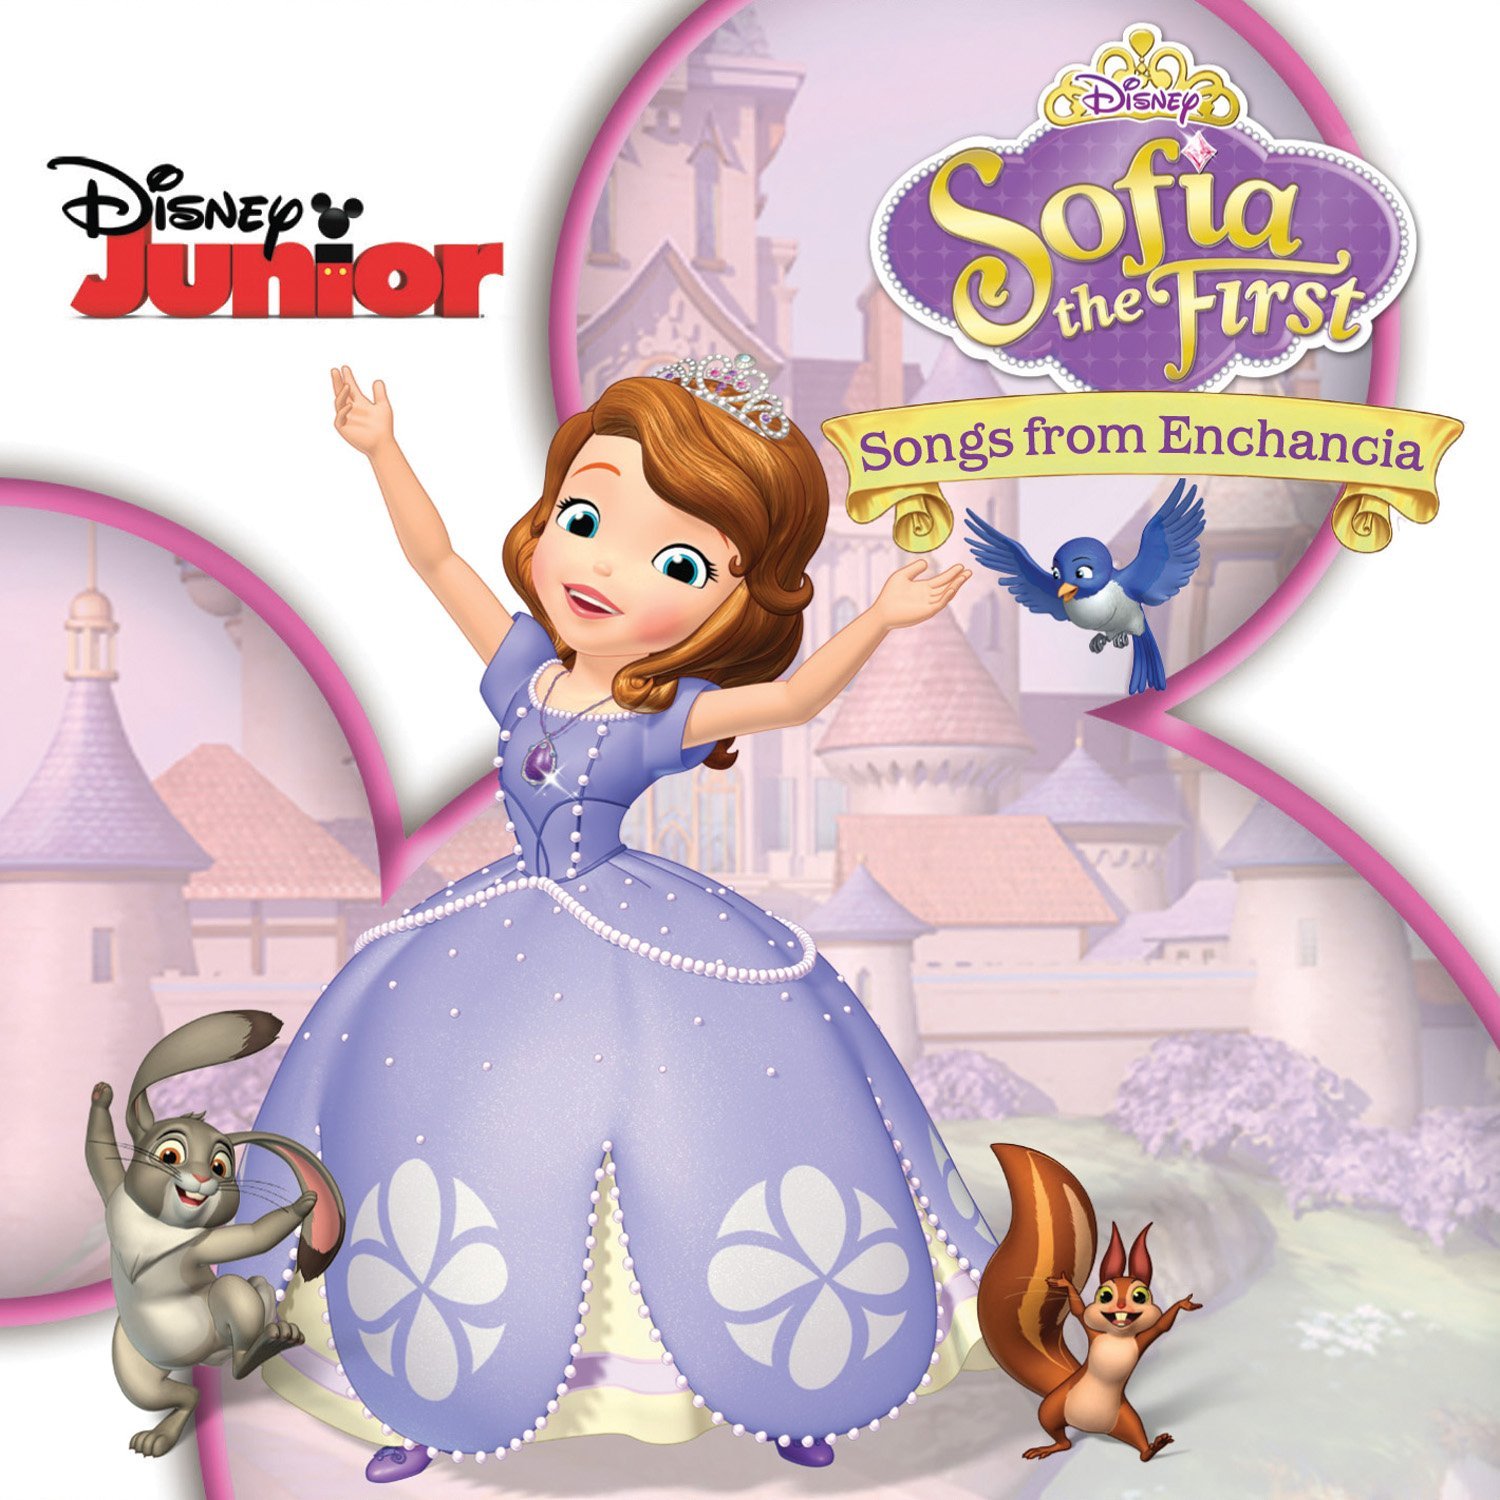 Sofia the First Songs from Enchancia CD